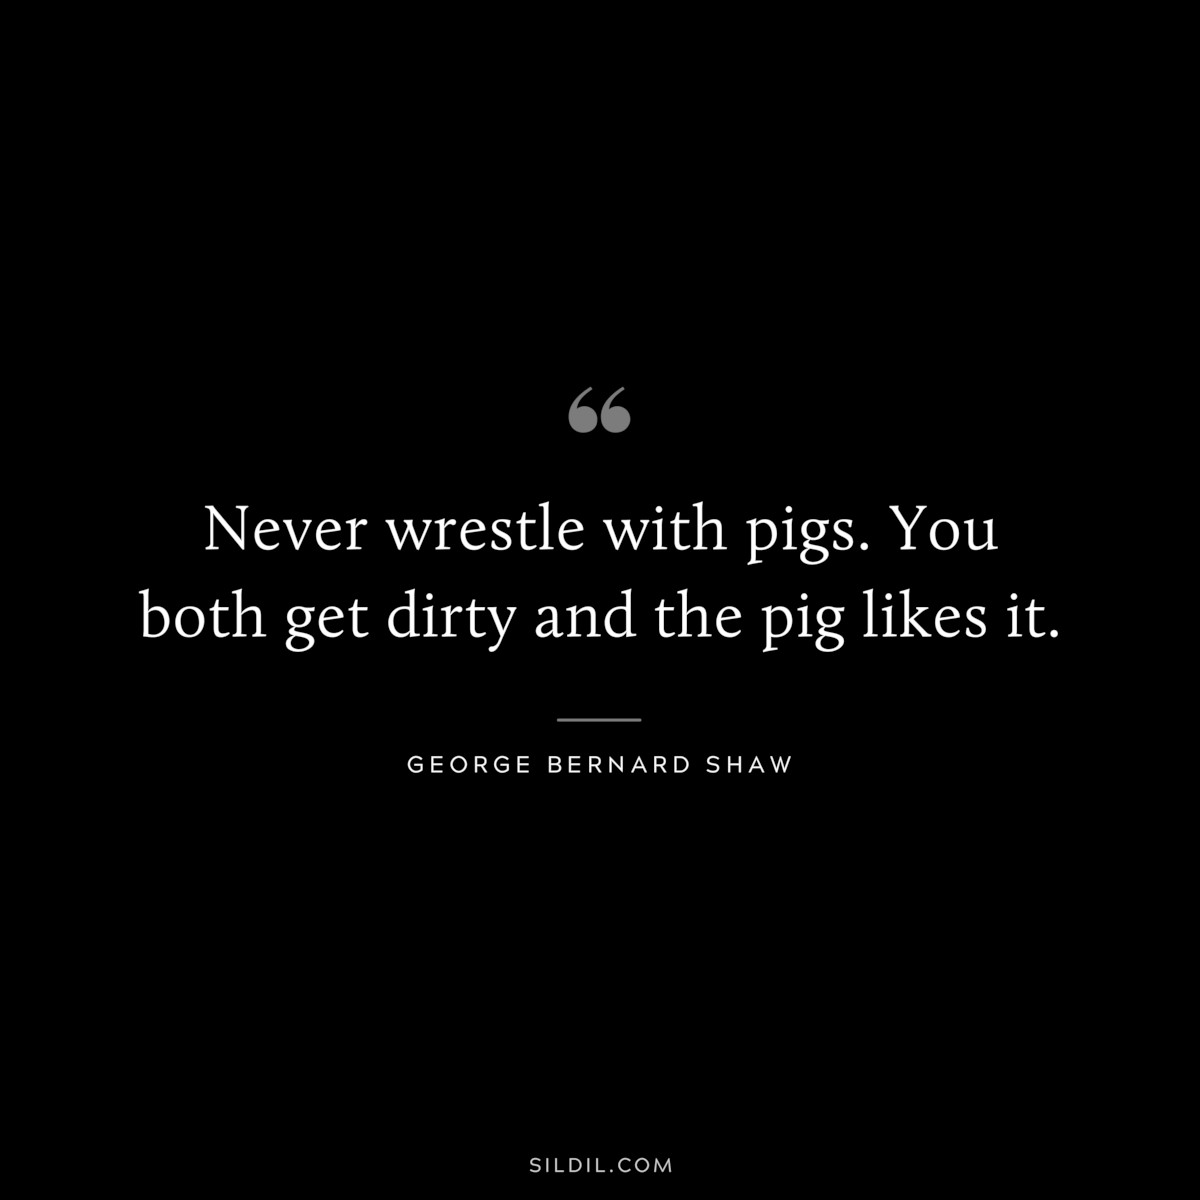 Never wrestle with pigs. You both get dirty and the pig likes it. ― George Bernard Shaw